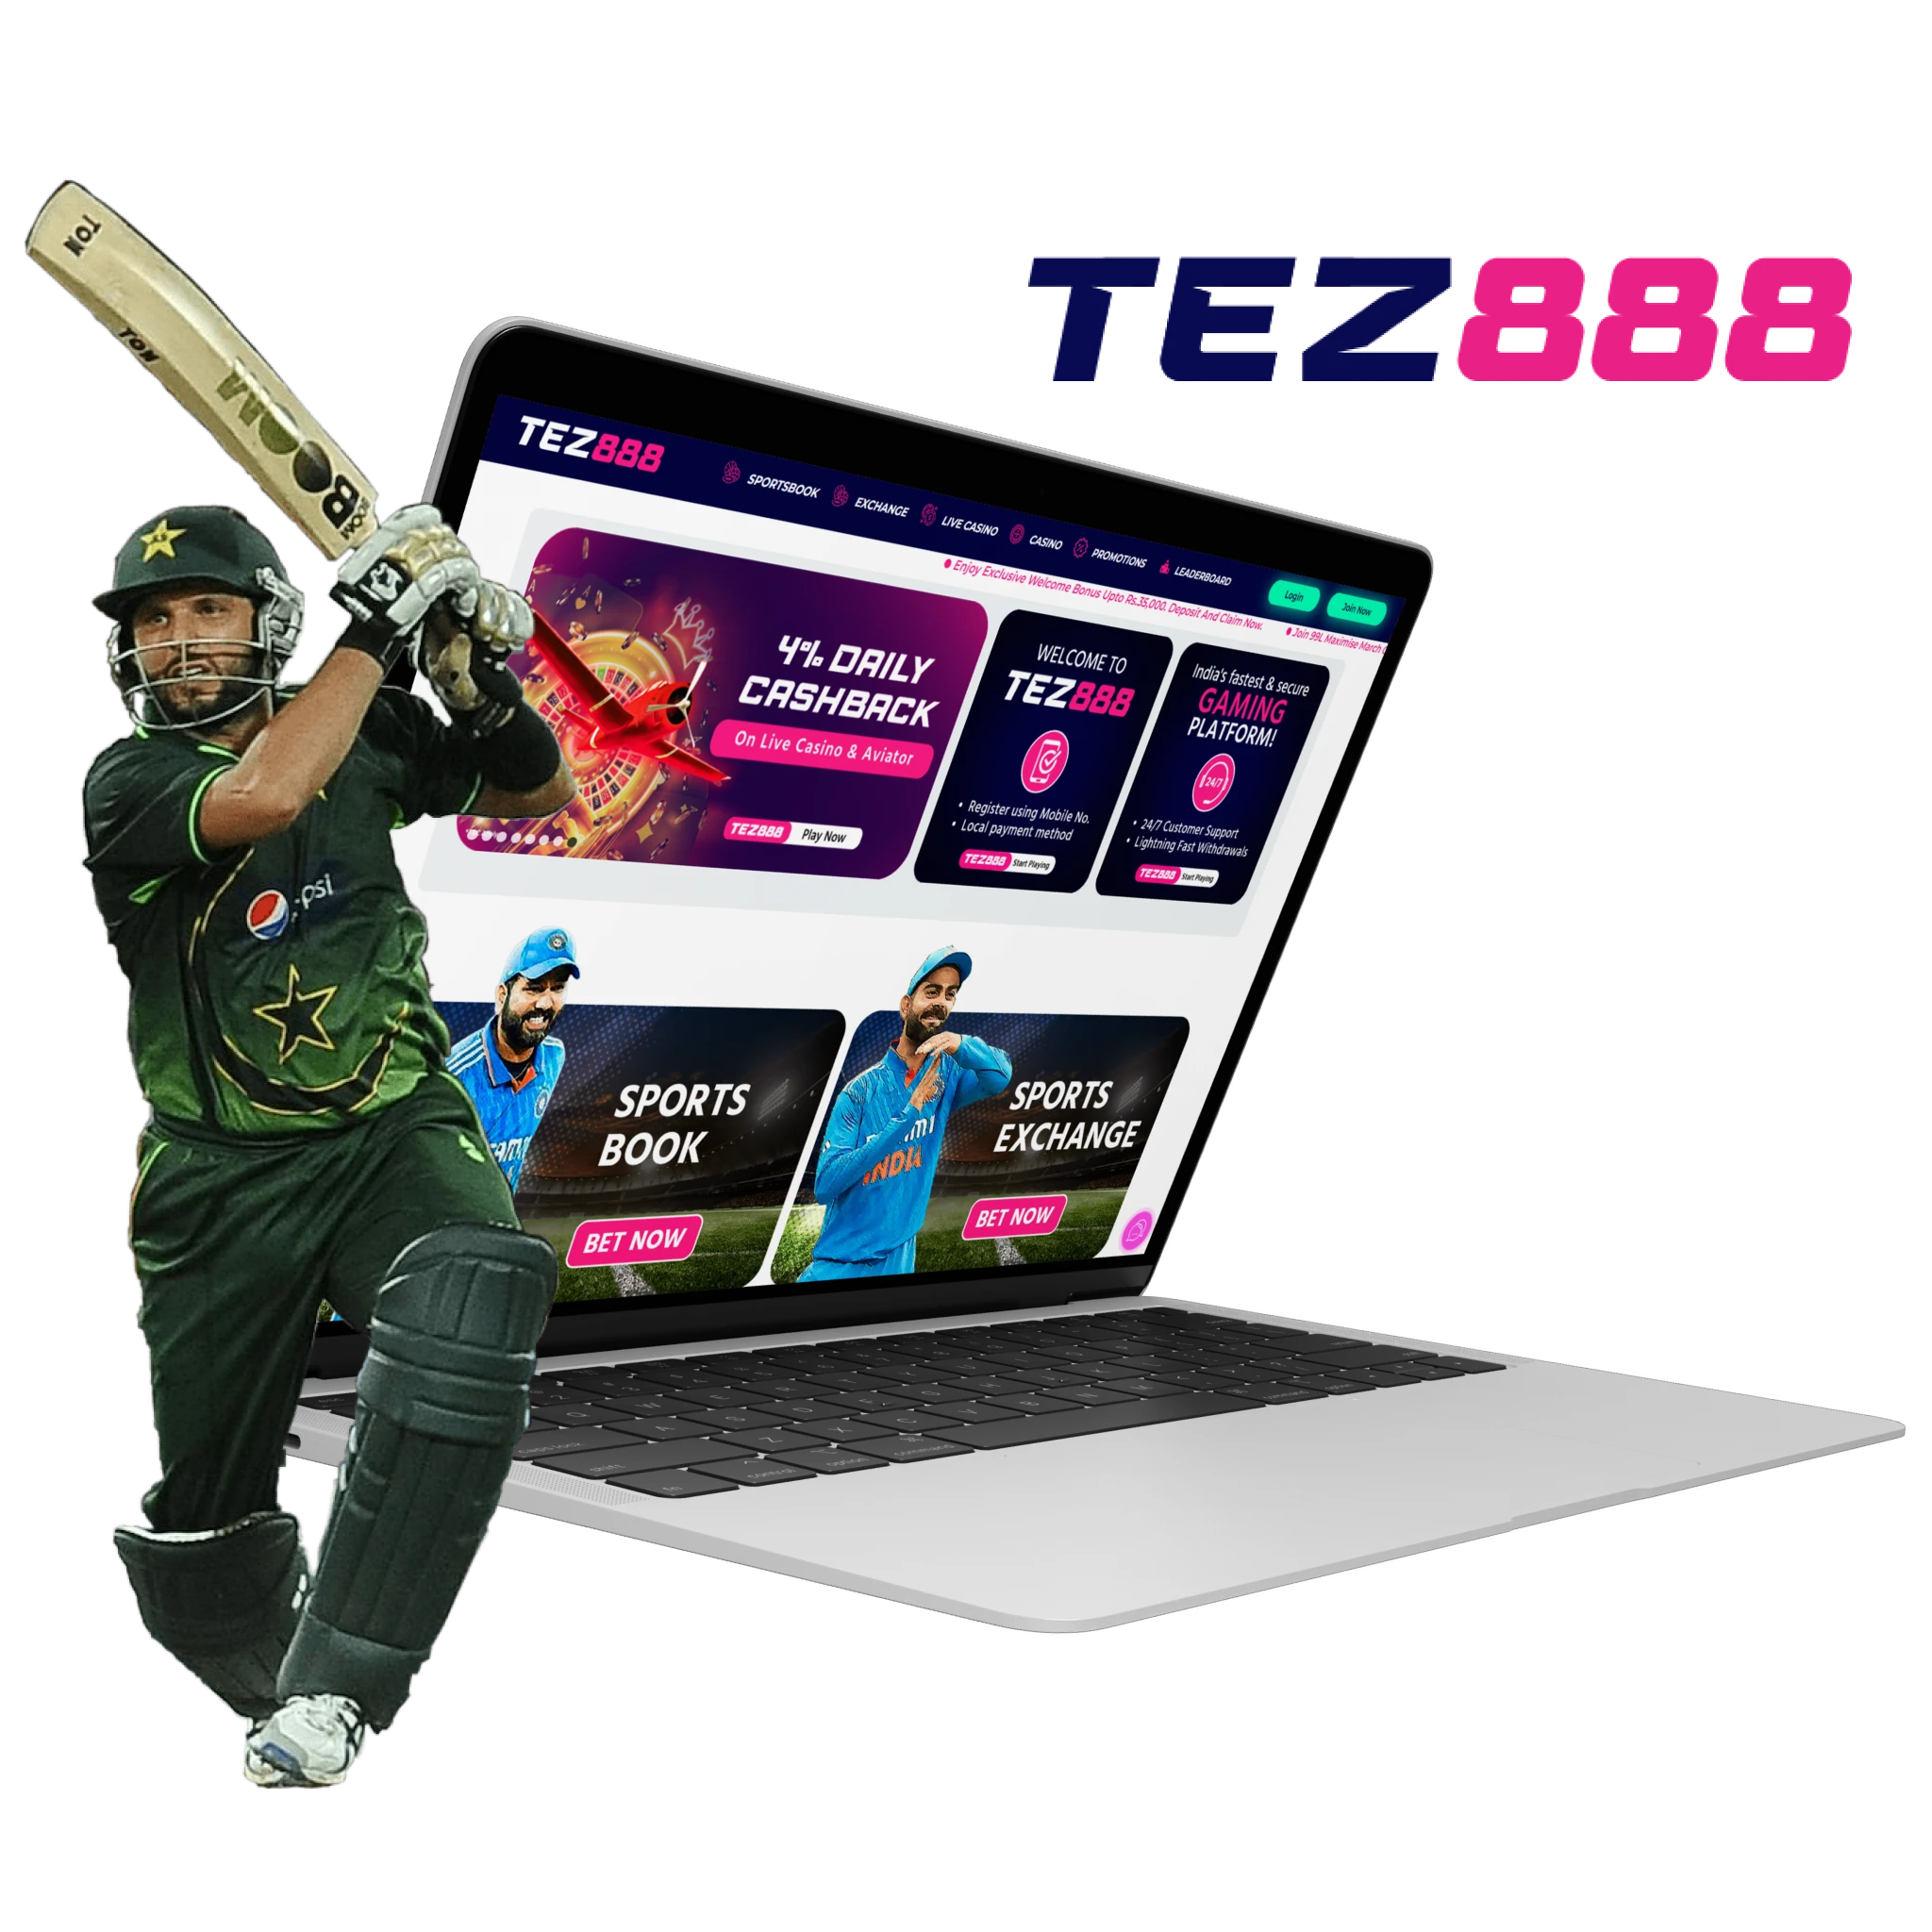 Tez888 is a secure, trustworthy, and legal cricket betting site in India.